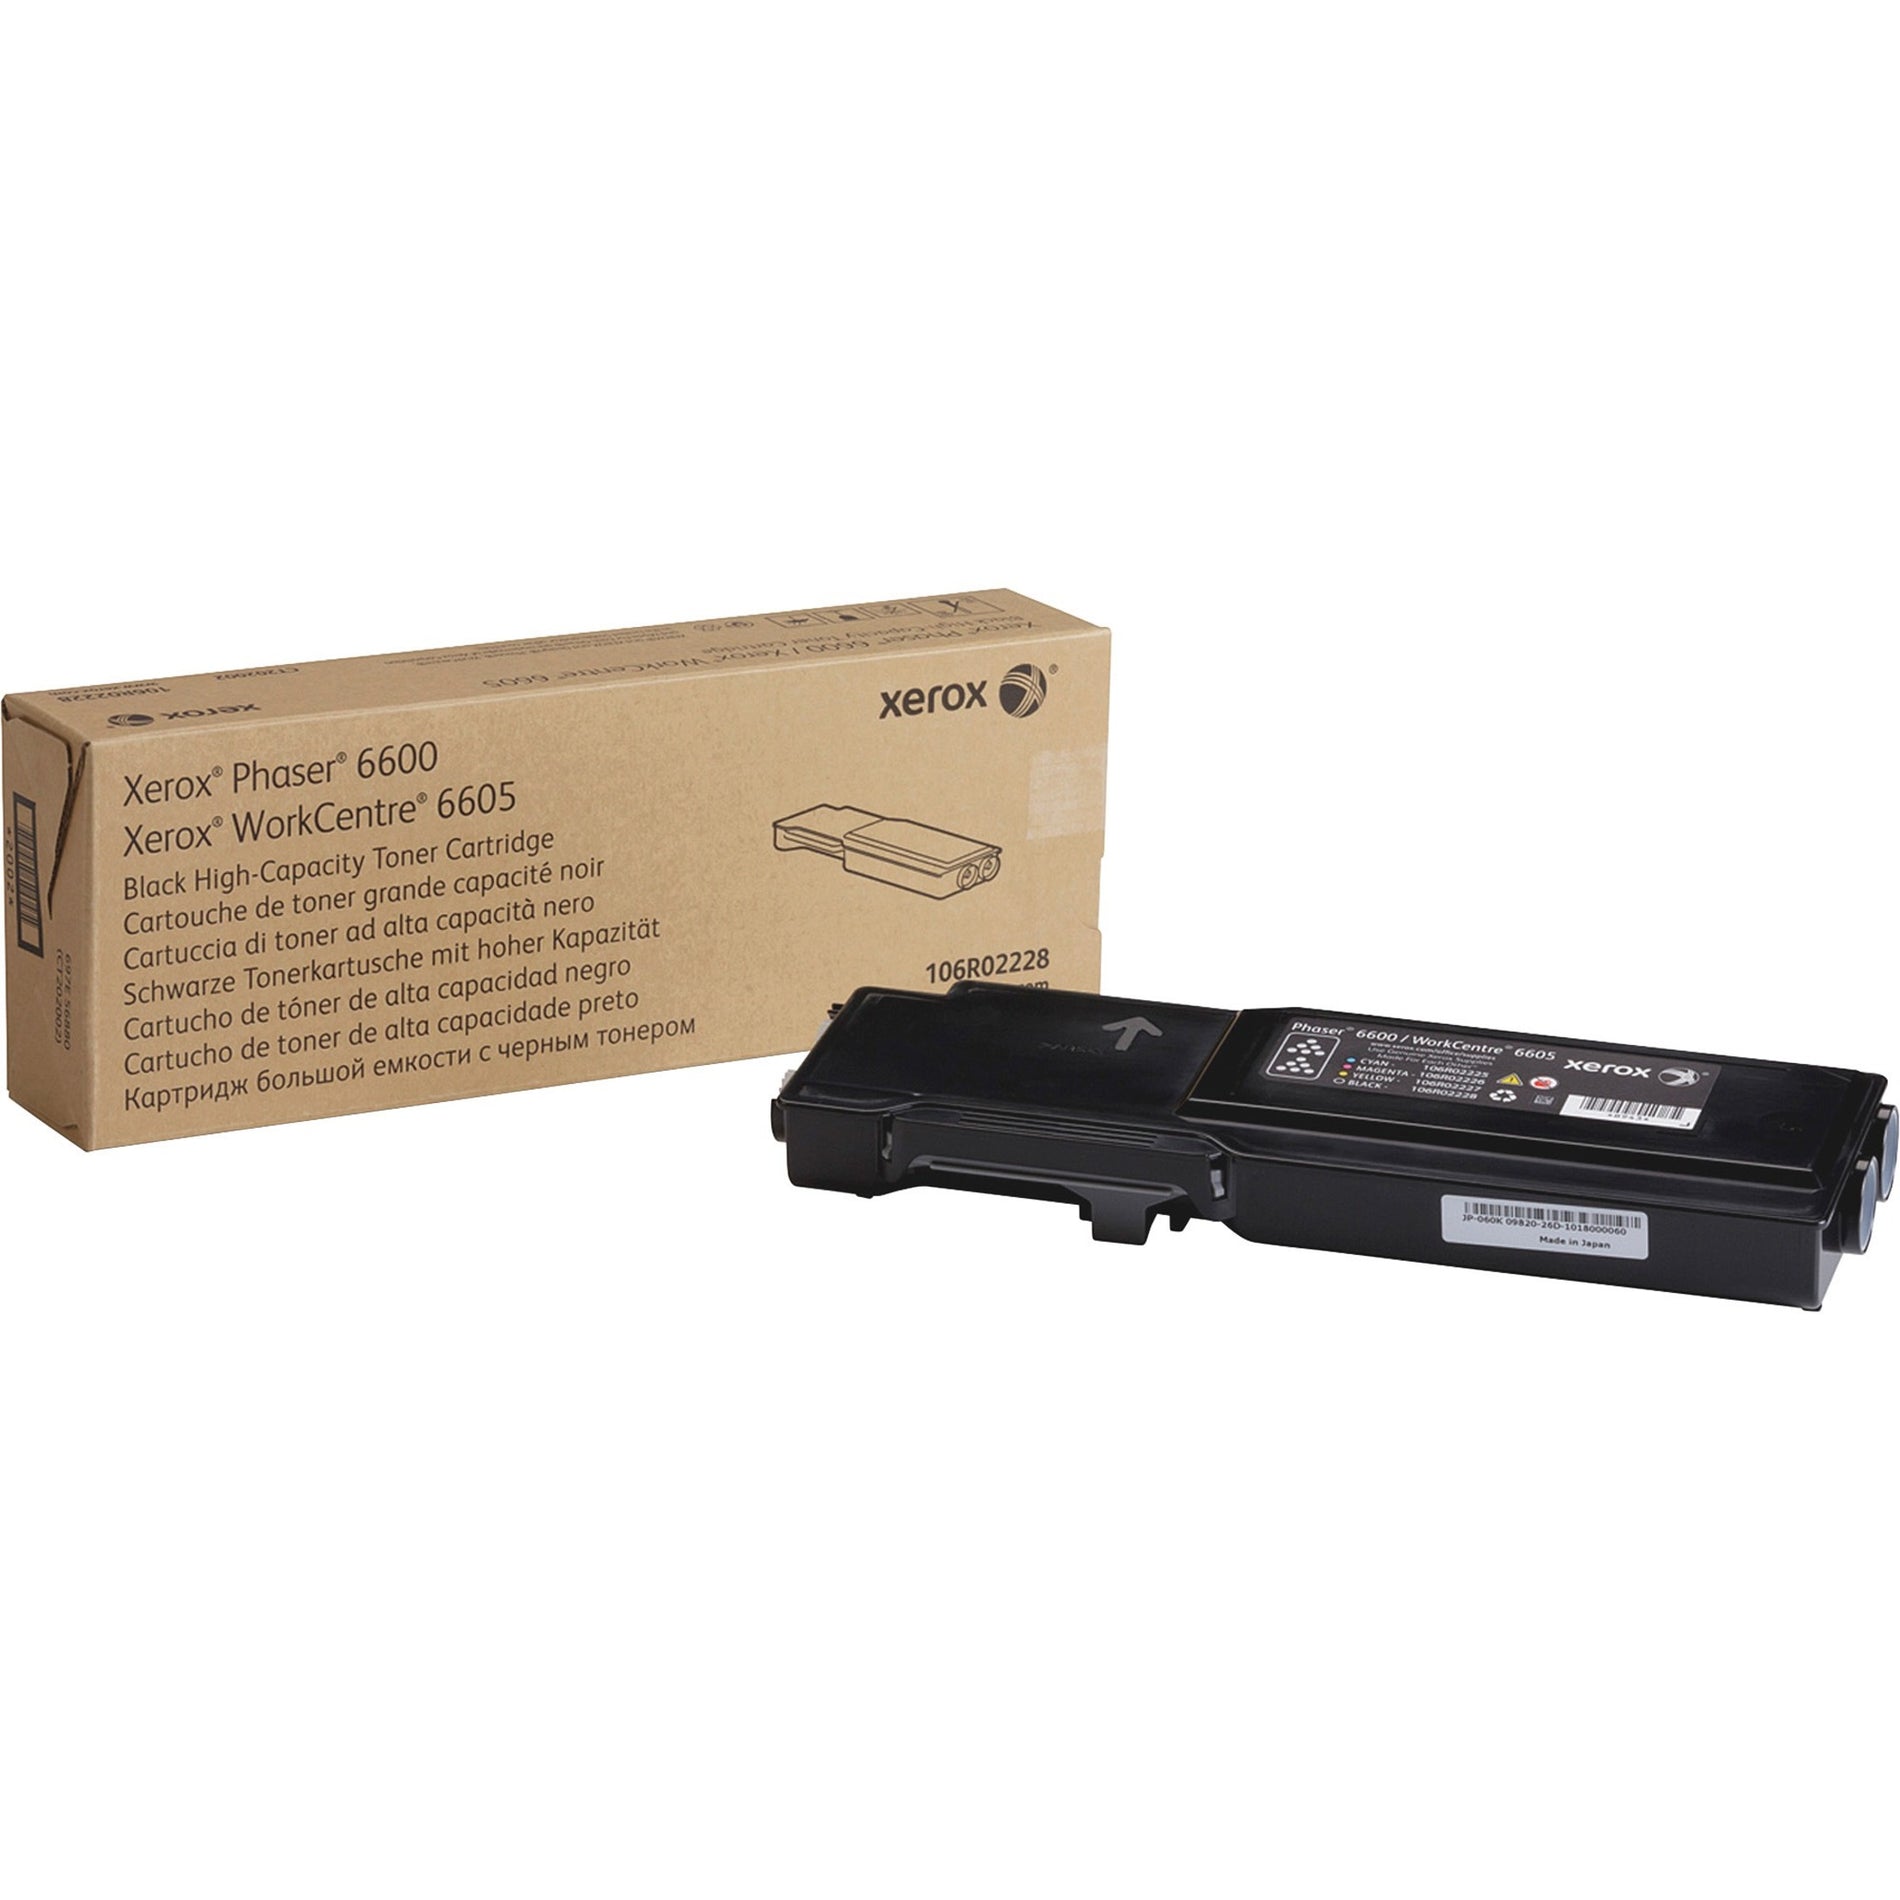 Xerox 106R02228 Phaser 6600/WorkCentre 6605 High Capacity Toner Cartridge, 8,000 Page Yield, Black